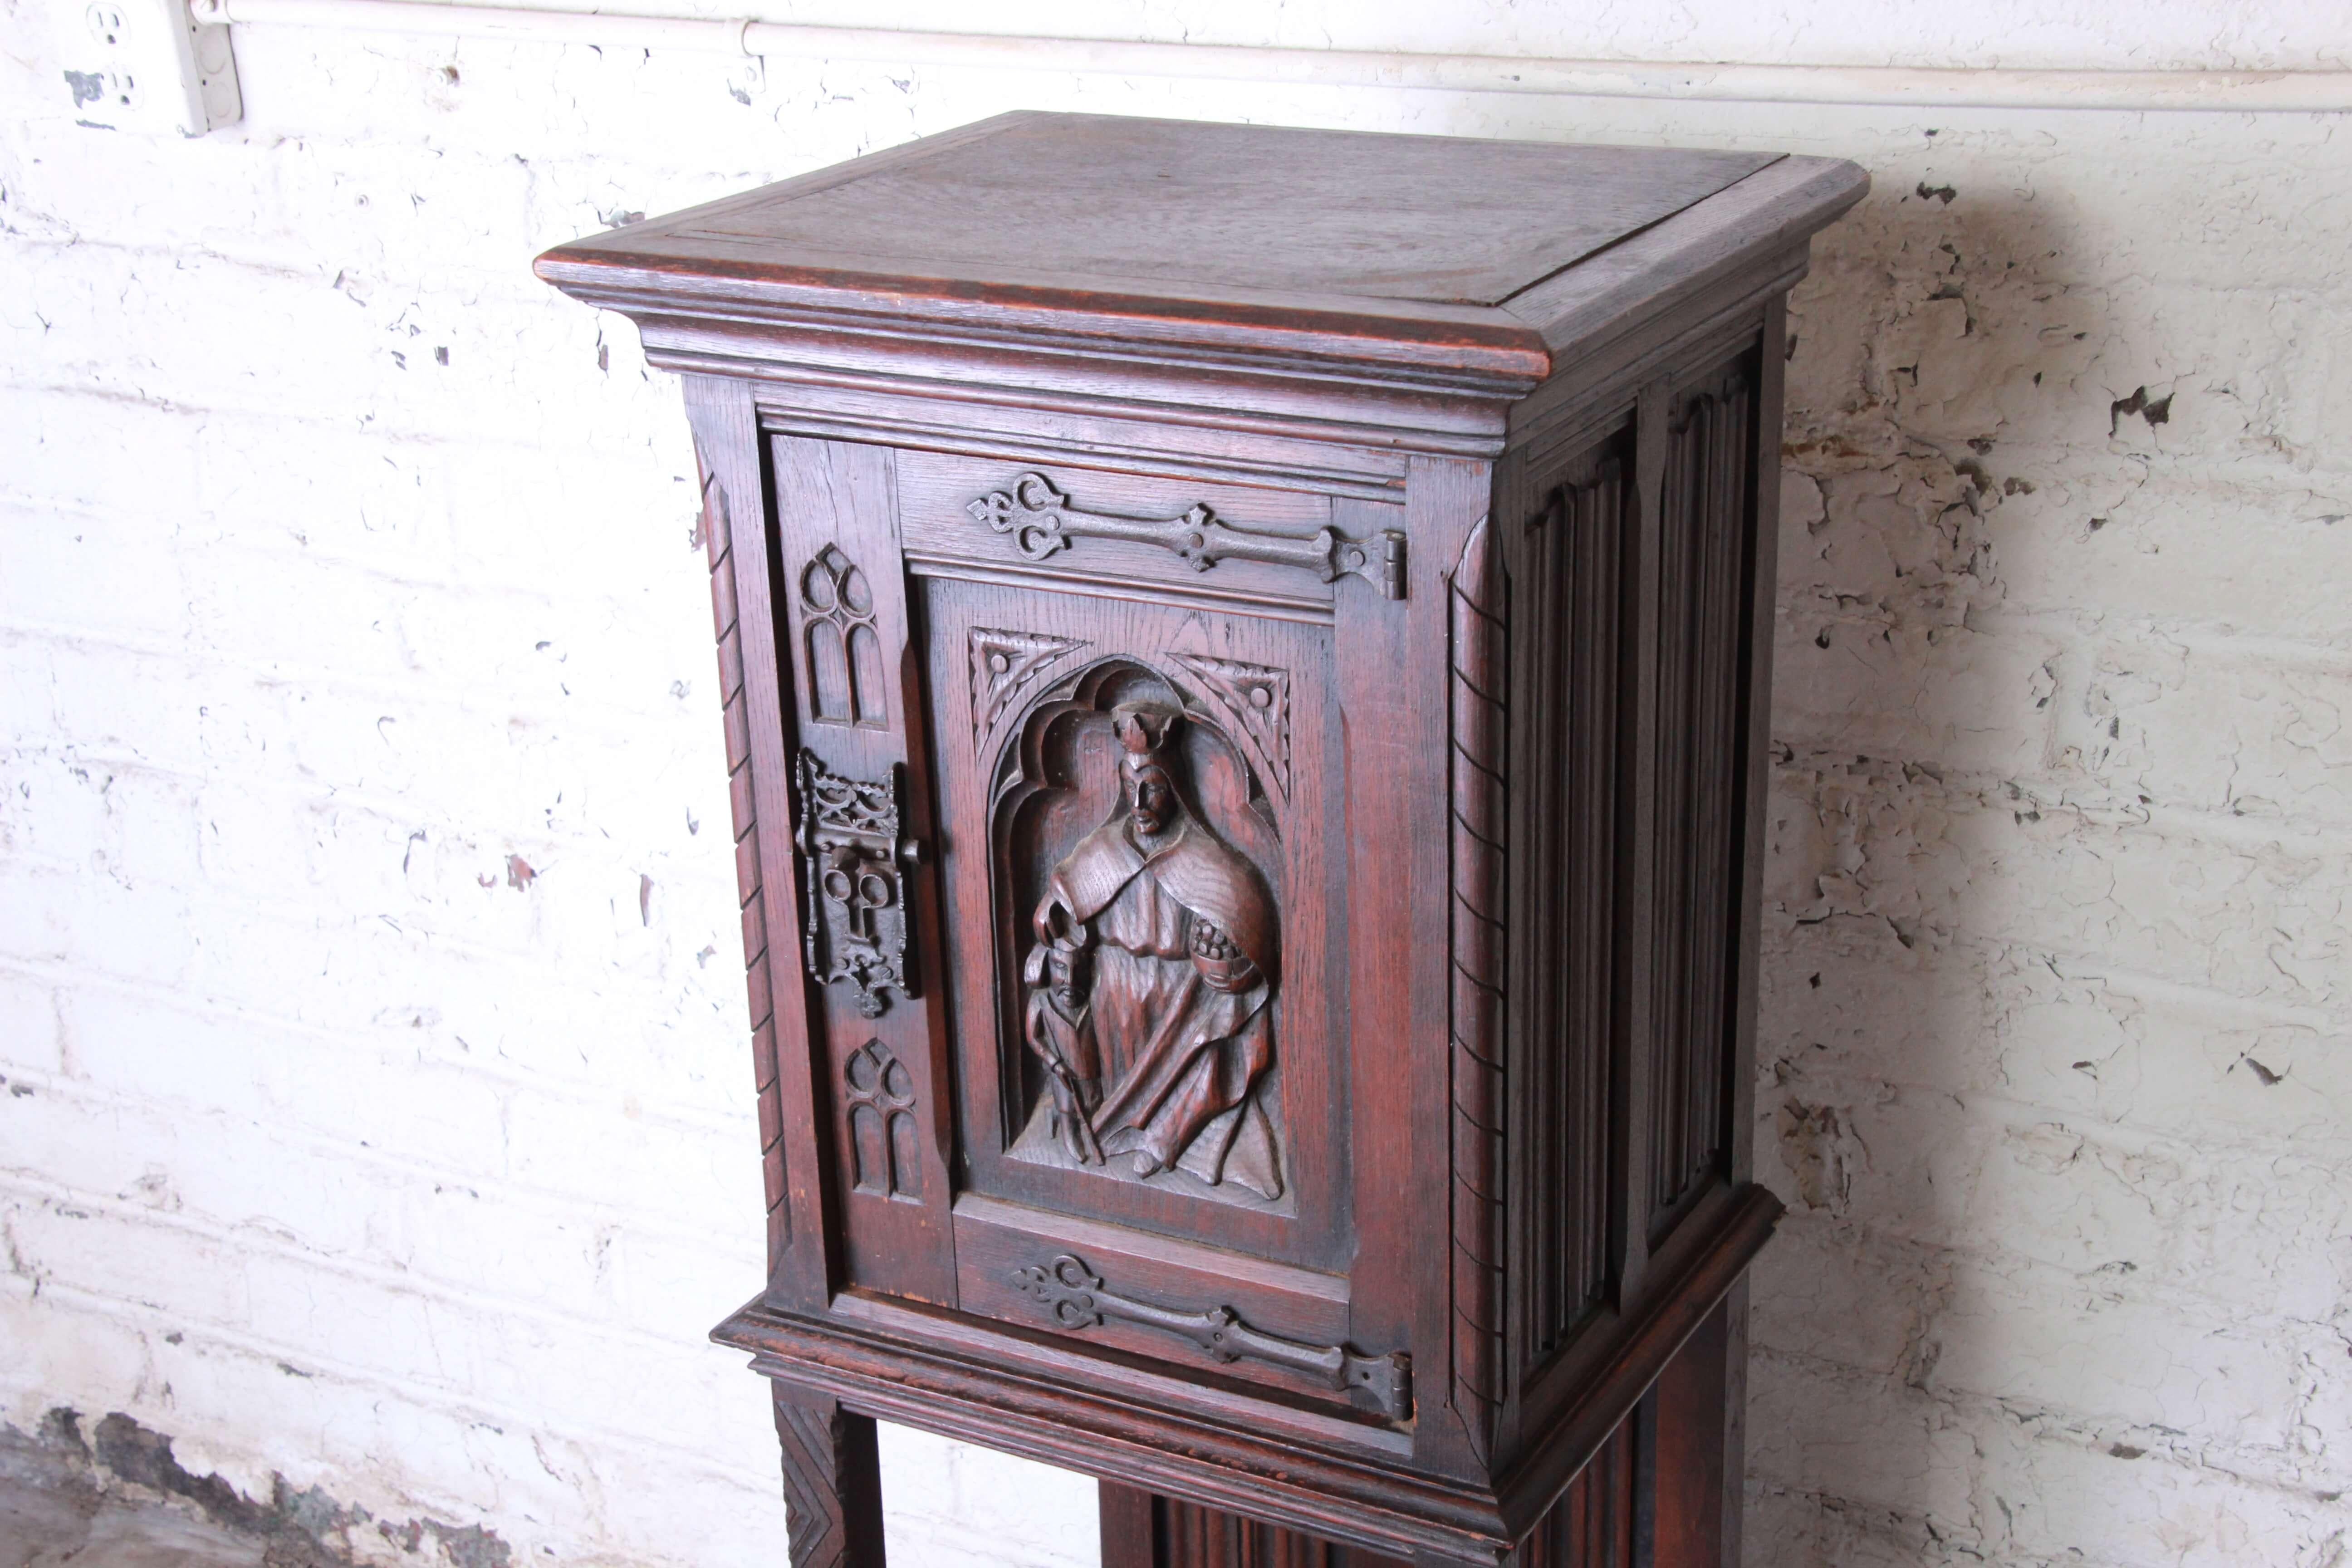 A gorgeous ornate carved oak Gothic bar cabinet with religious figure

Belgium, 19th century

Carved oak + iron

Measures: 19